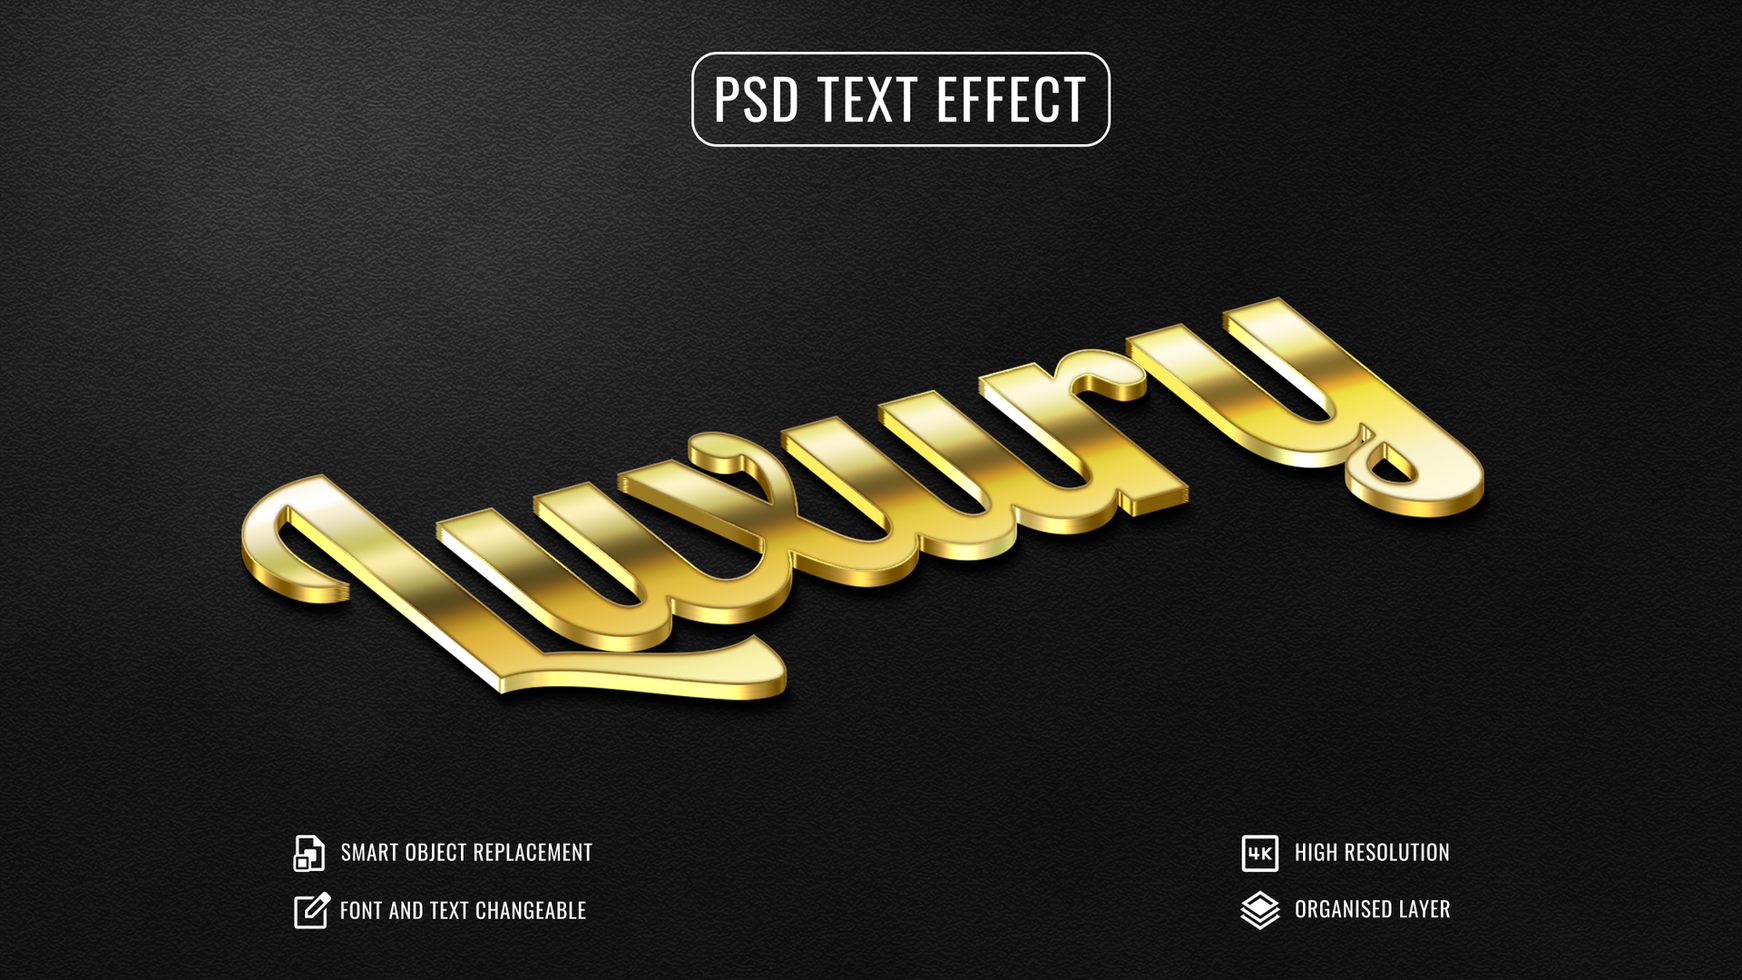 Isometric luxury gold text effect psd